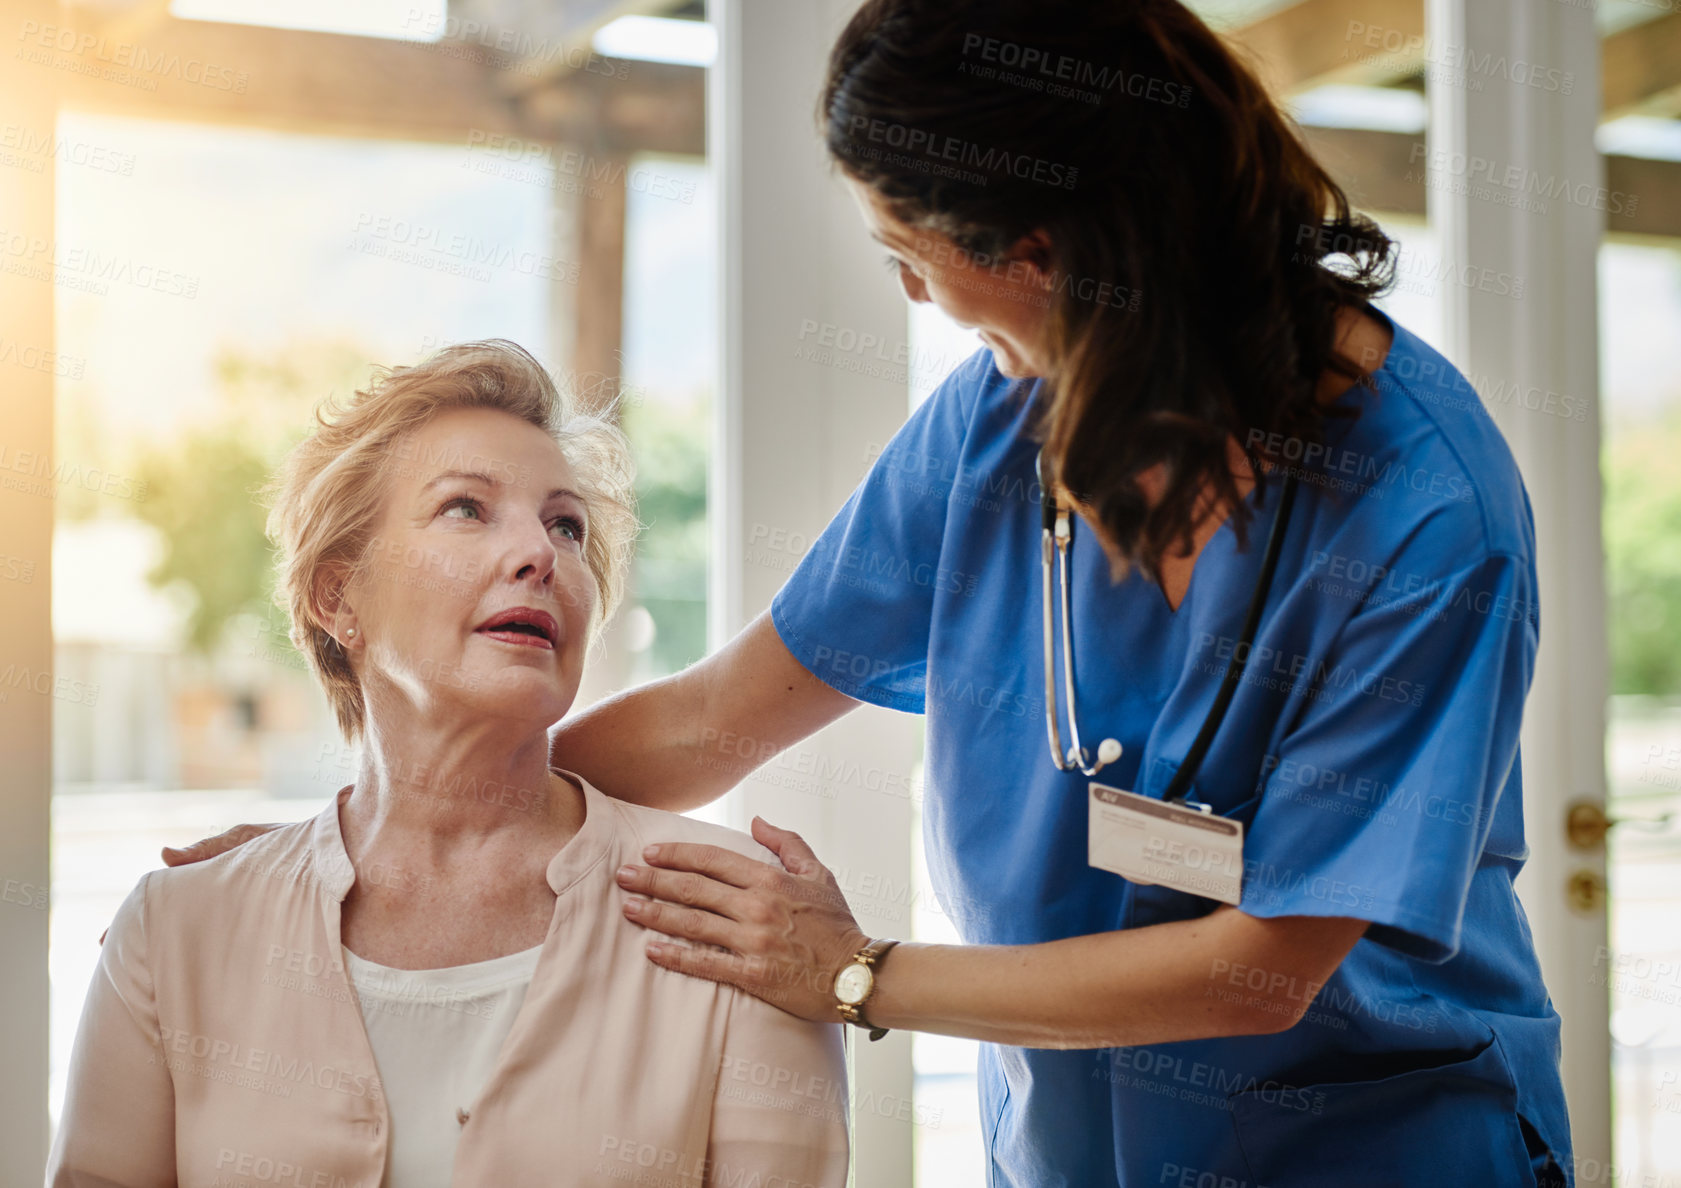 Buy stock photo Shot of a senior woman talking with a nurse in assisted living facility